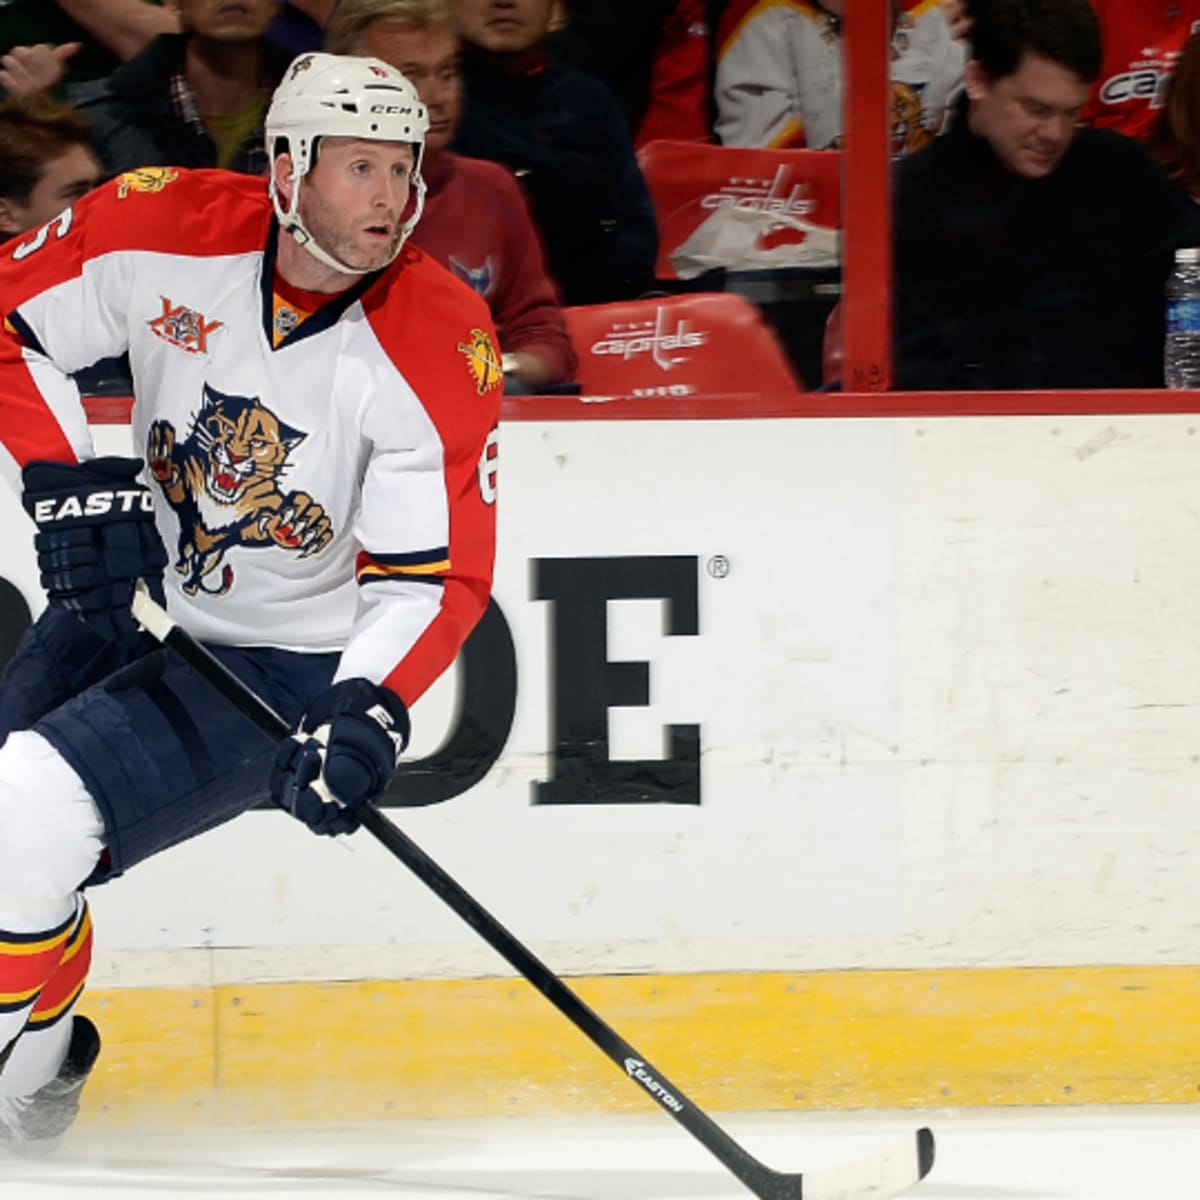 KHL hasn't paid Ryan Whitney since “before January”